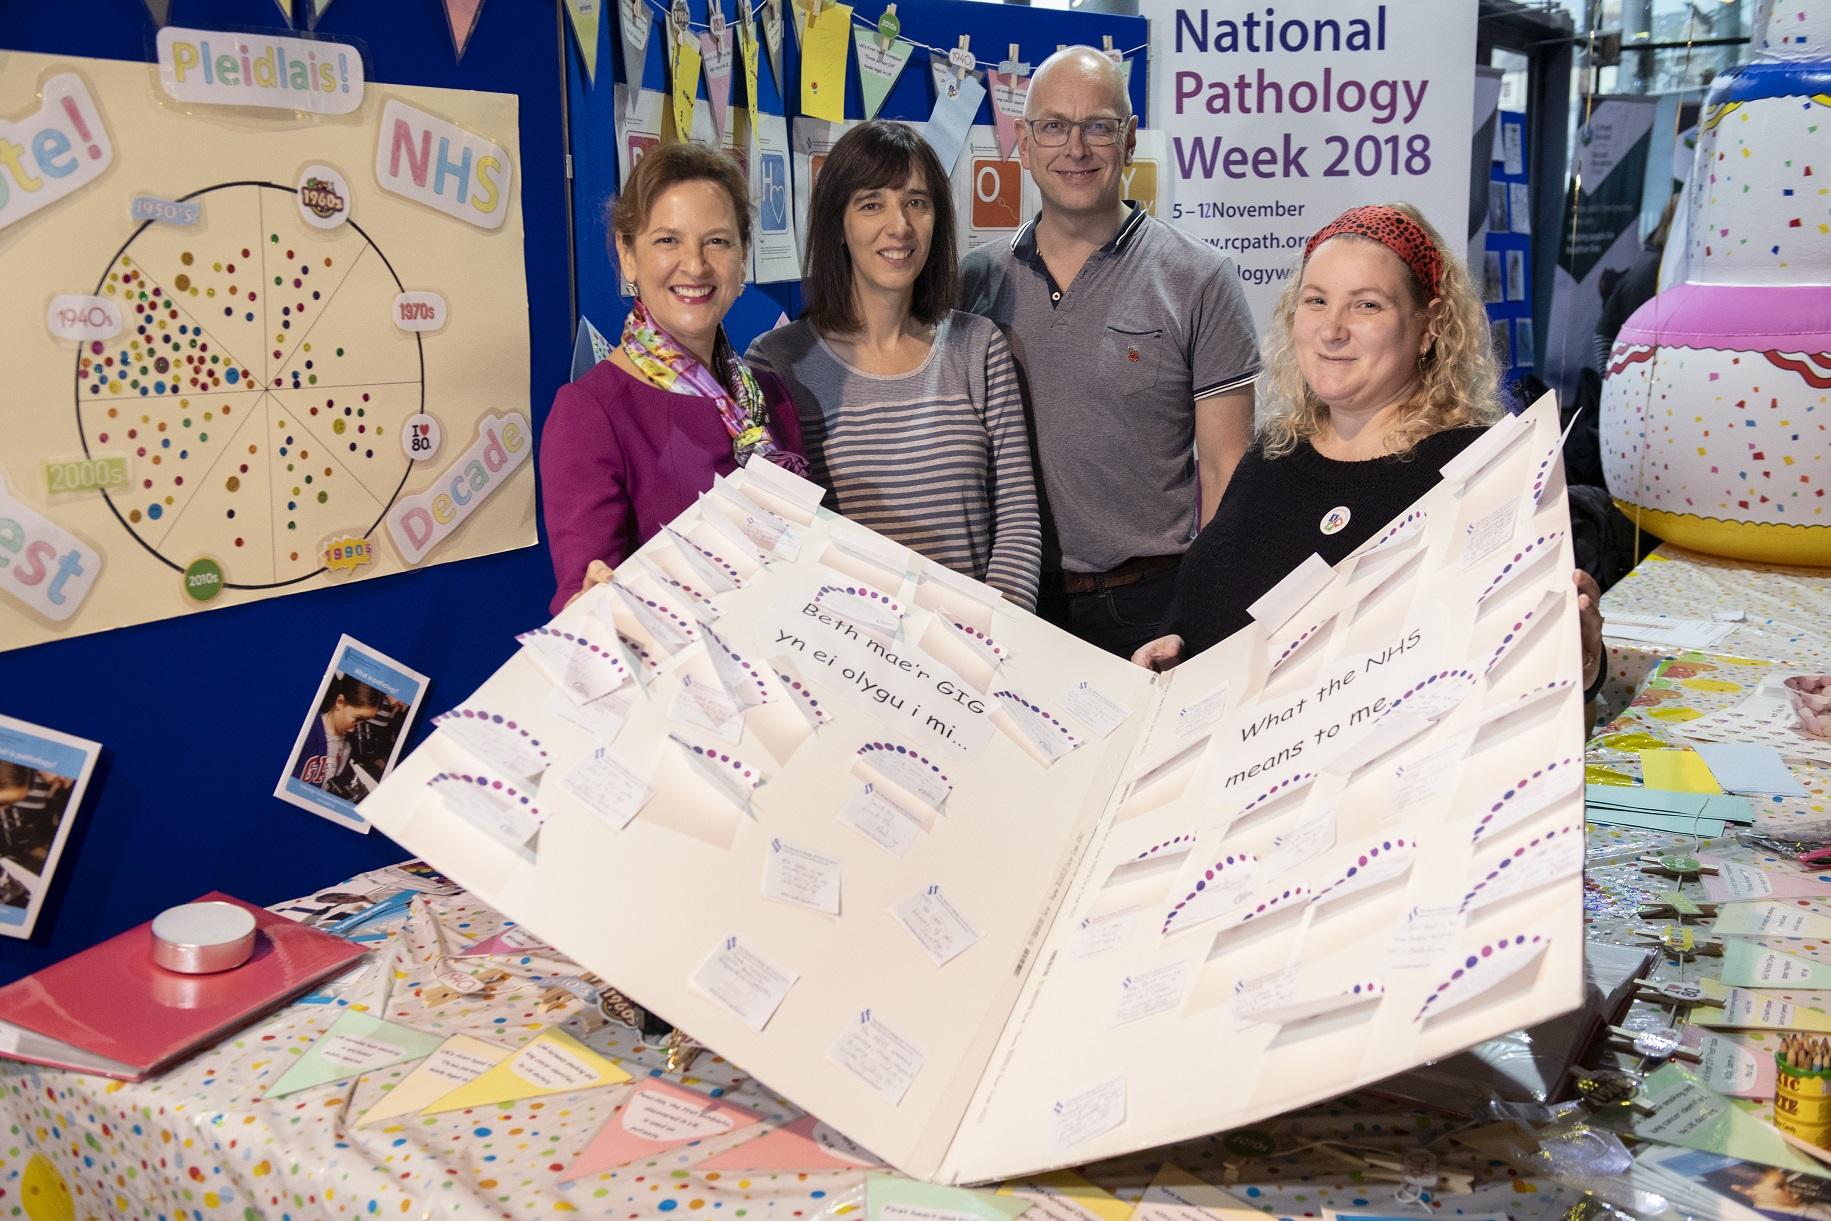 The giant 70th birthday card with thank you messages to the NHS